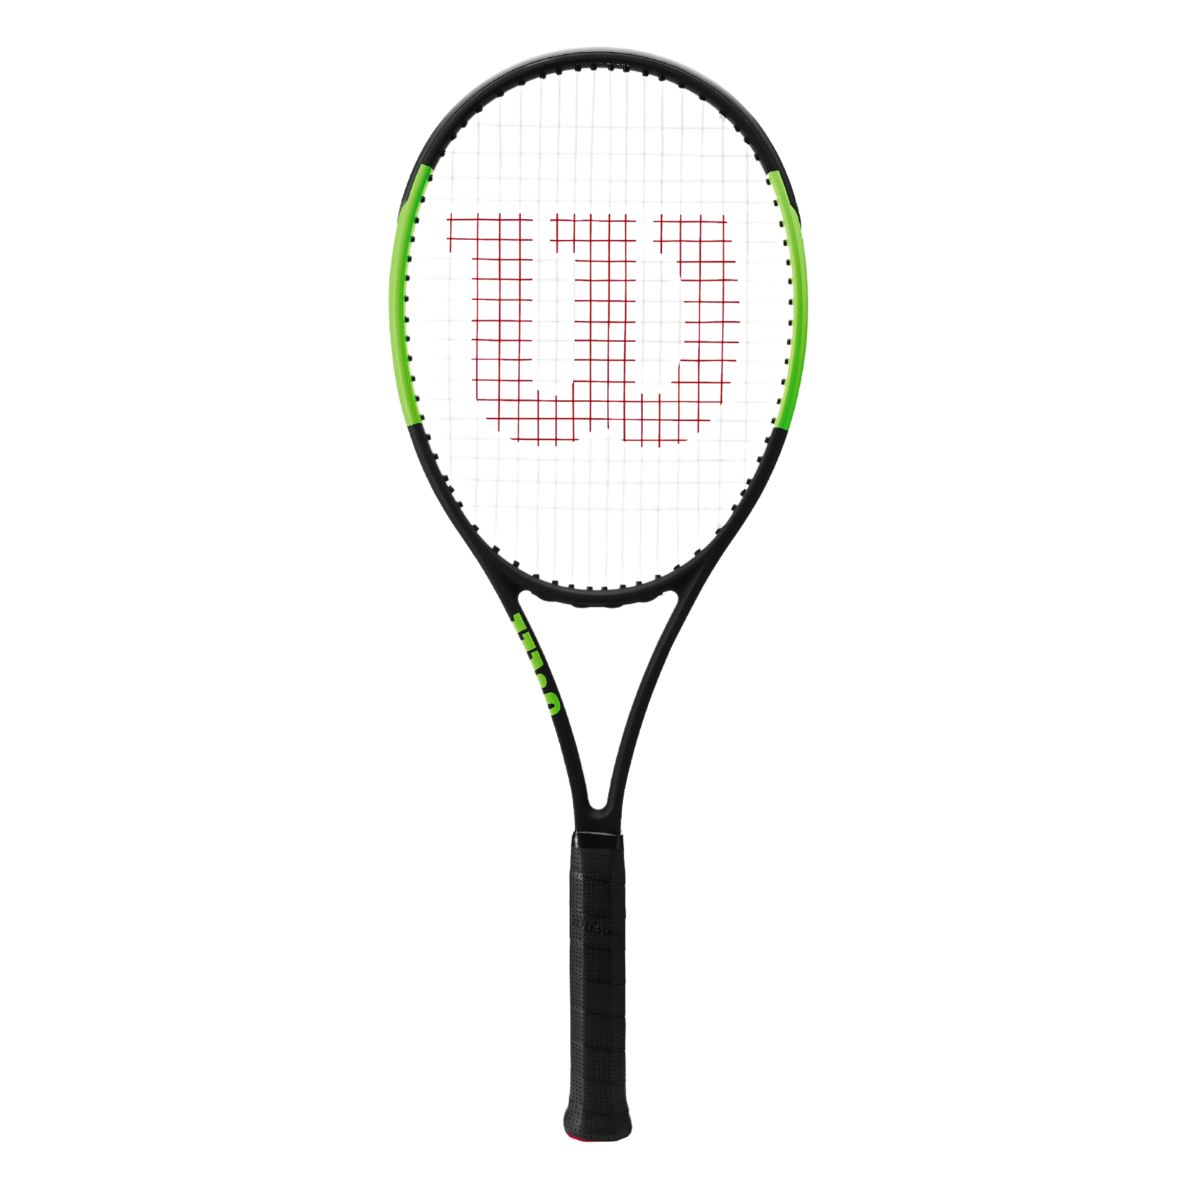 The Best Tennis Rackets for Flat Hitters Options: Wilson Blade 98 16×19